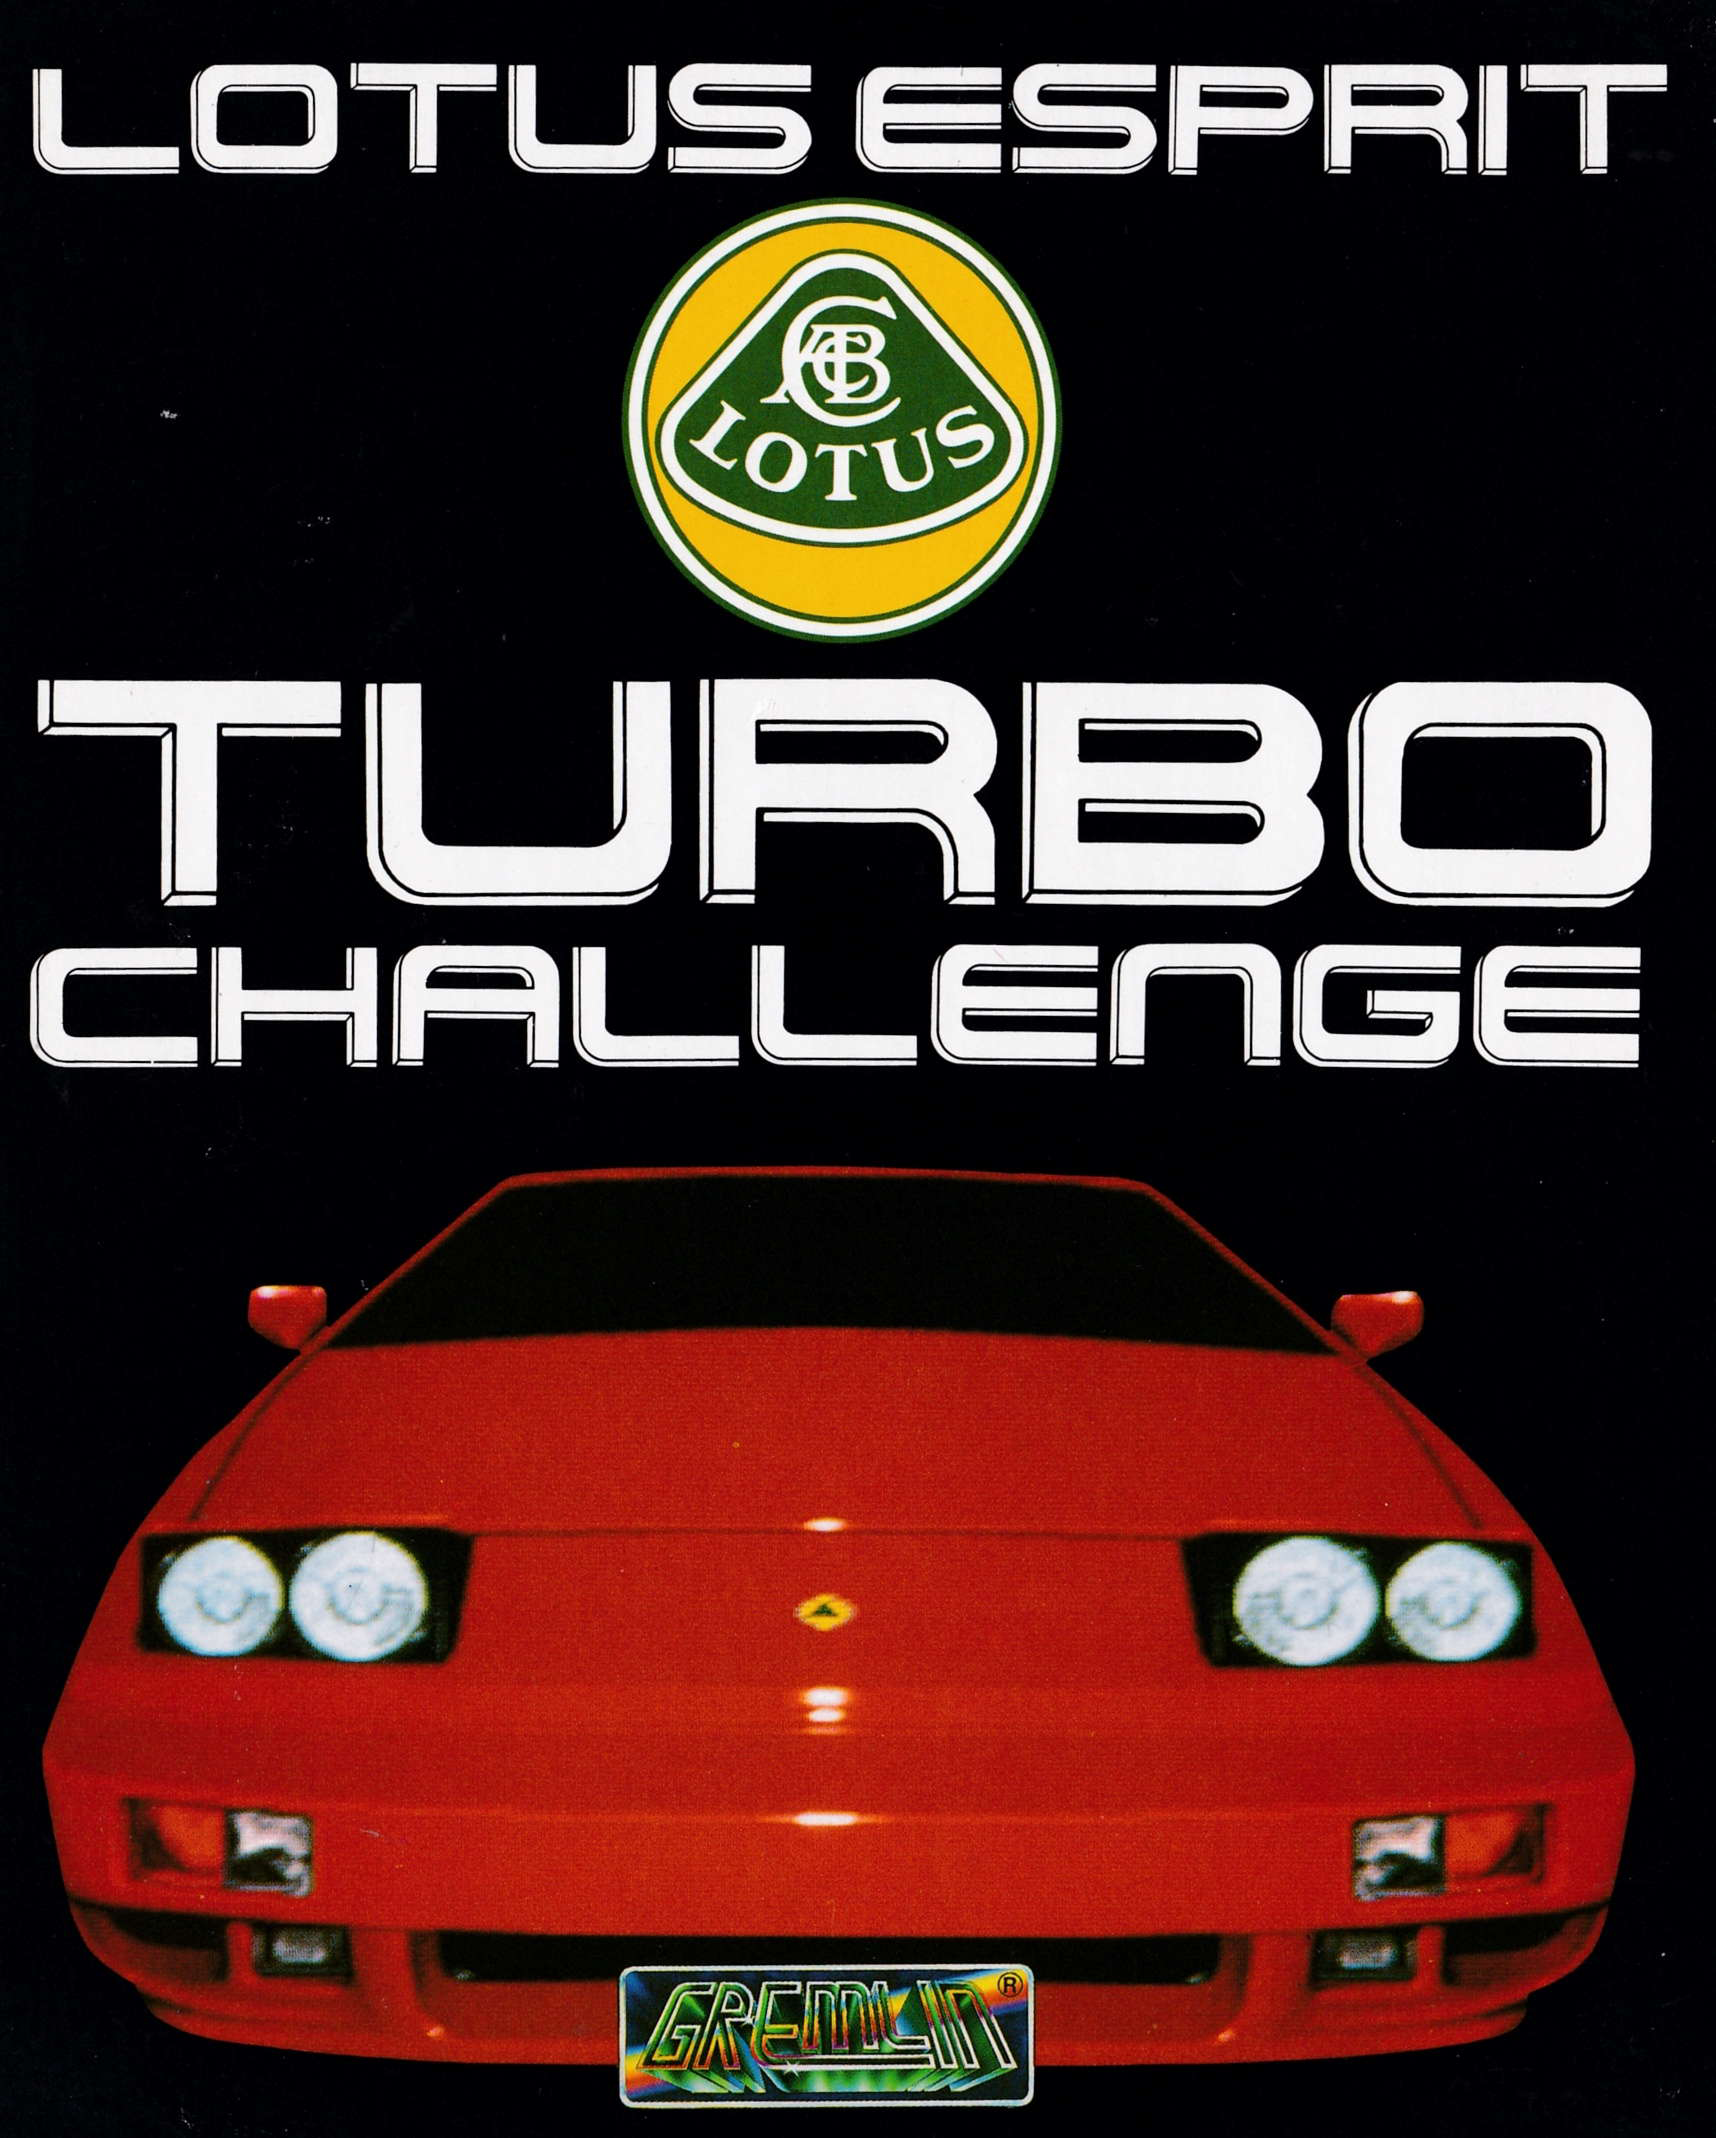 cover of the Amstrad CPC game Lotus Esprit Turbo Challenge  by GameBase CPC